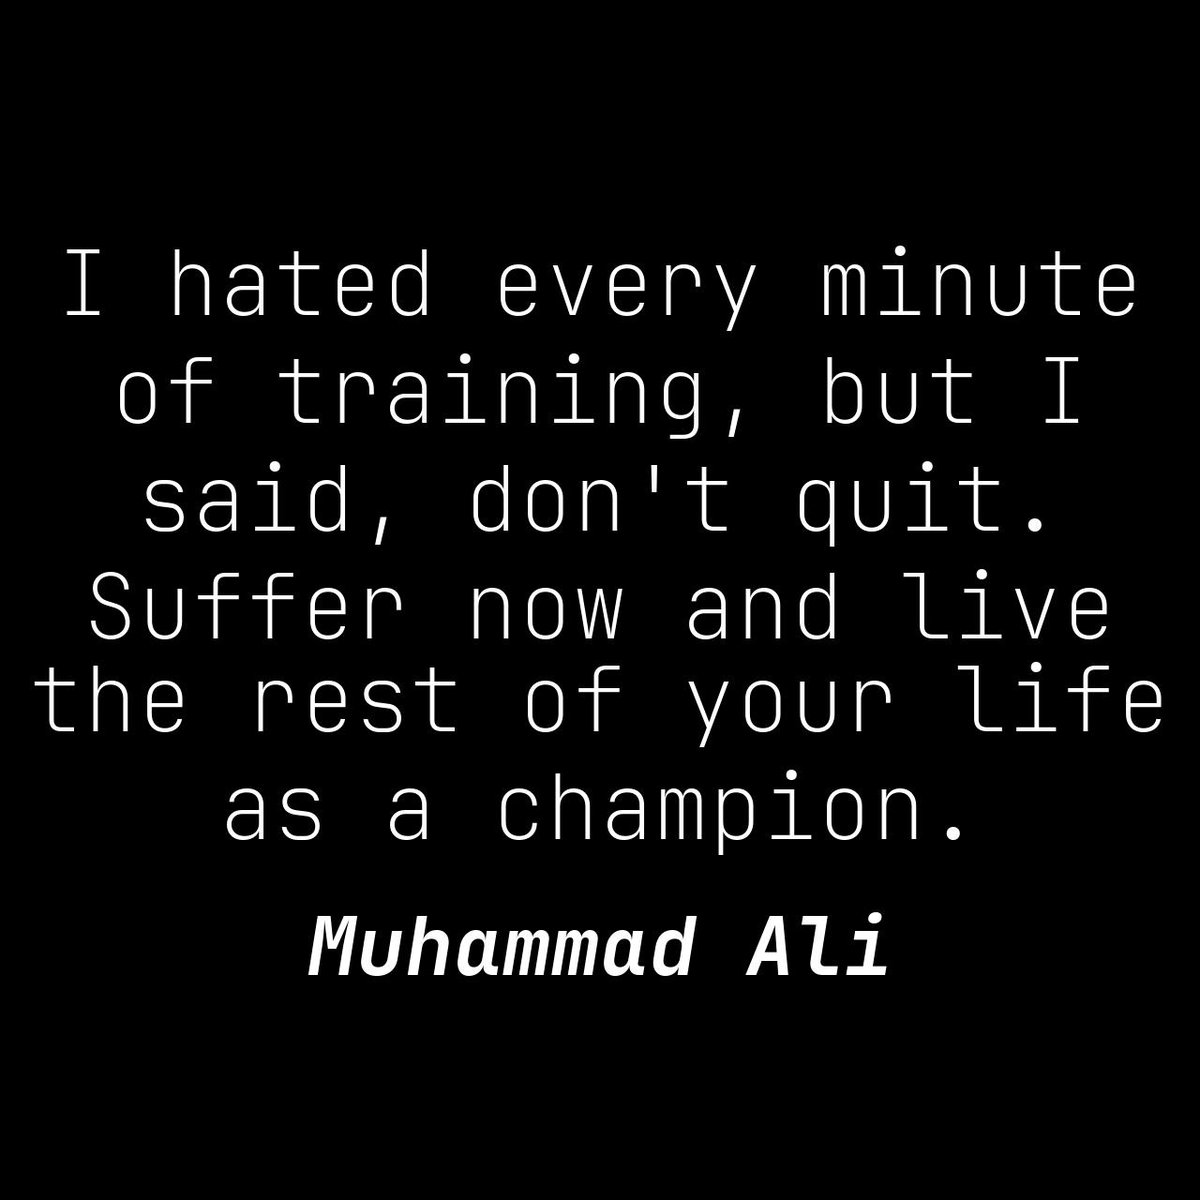 I may have despised every moment of my training, but I reminded myself not to give up. The pain I endured then paved the path to a triumphant future 🥊💪 #TrainingMotivation #DontQuit #SufferNow #ChampionMindset